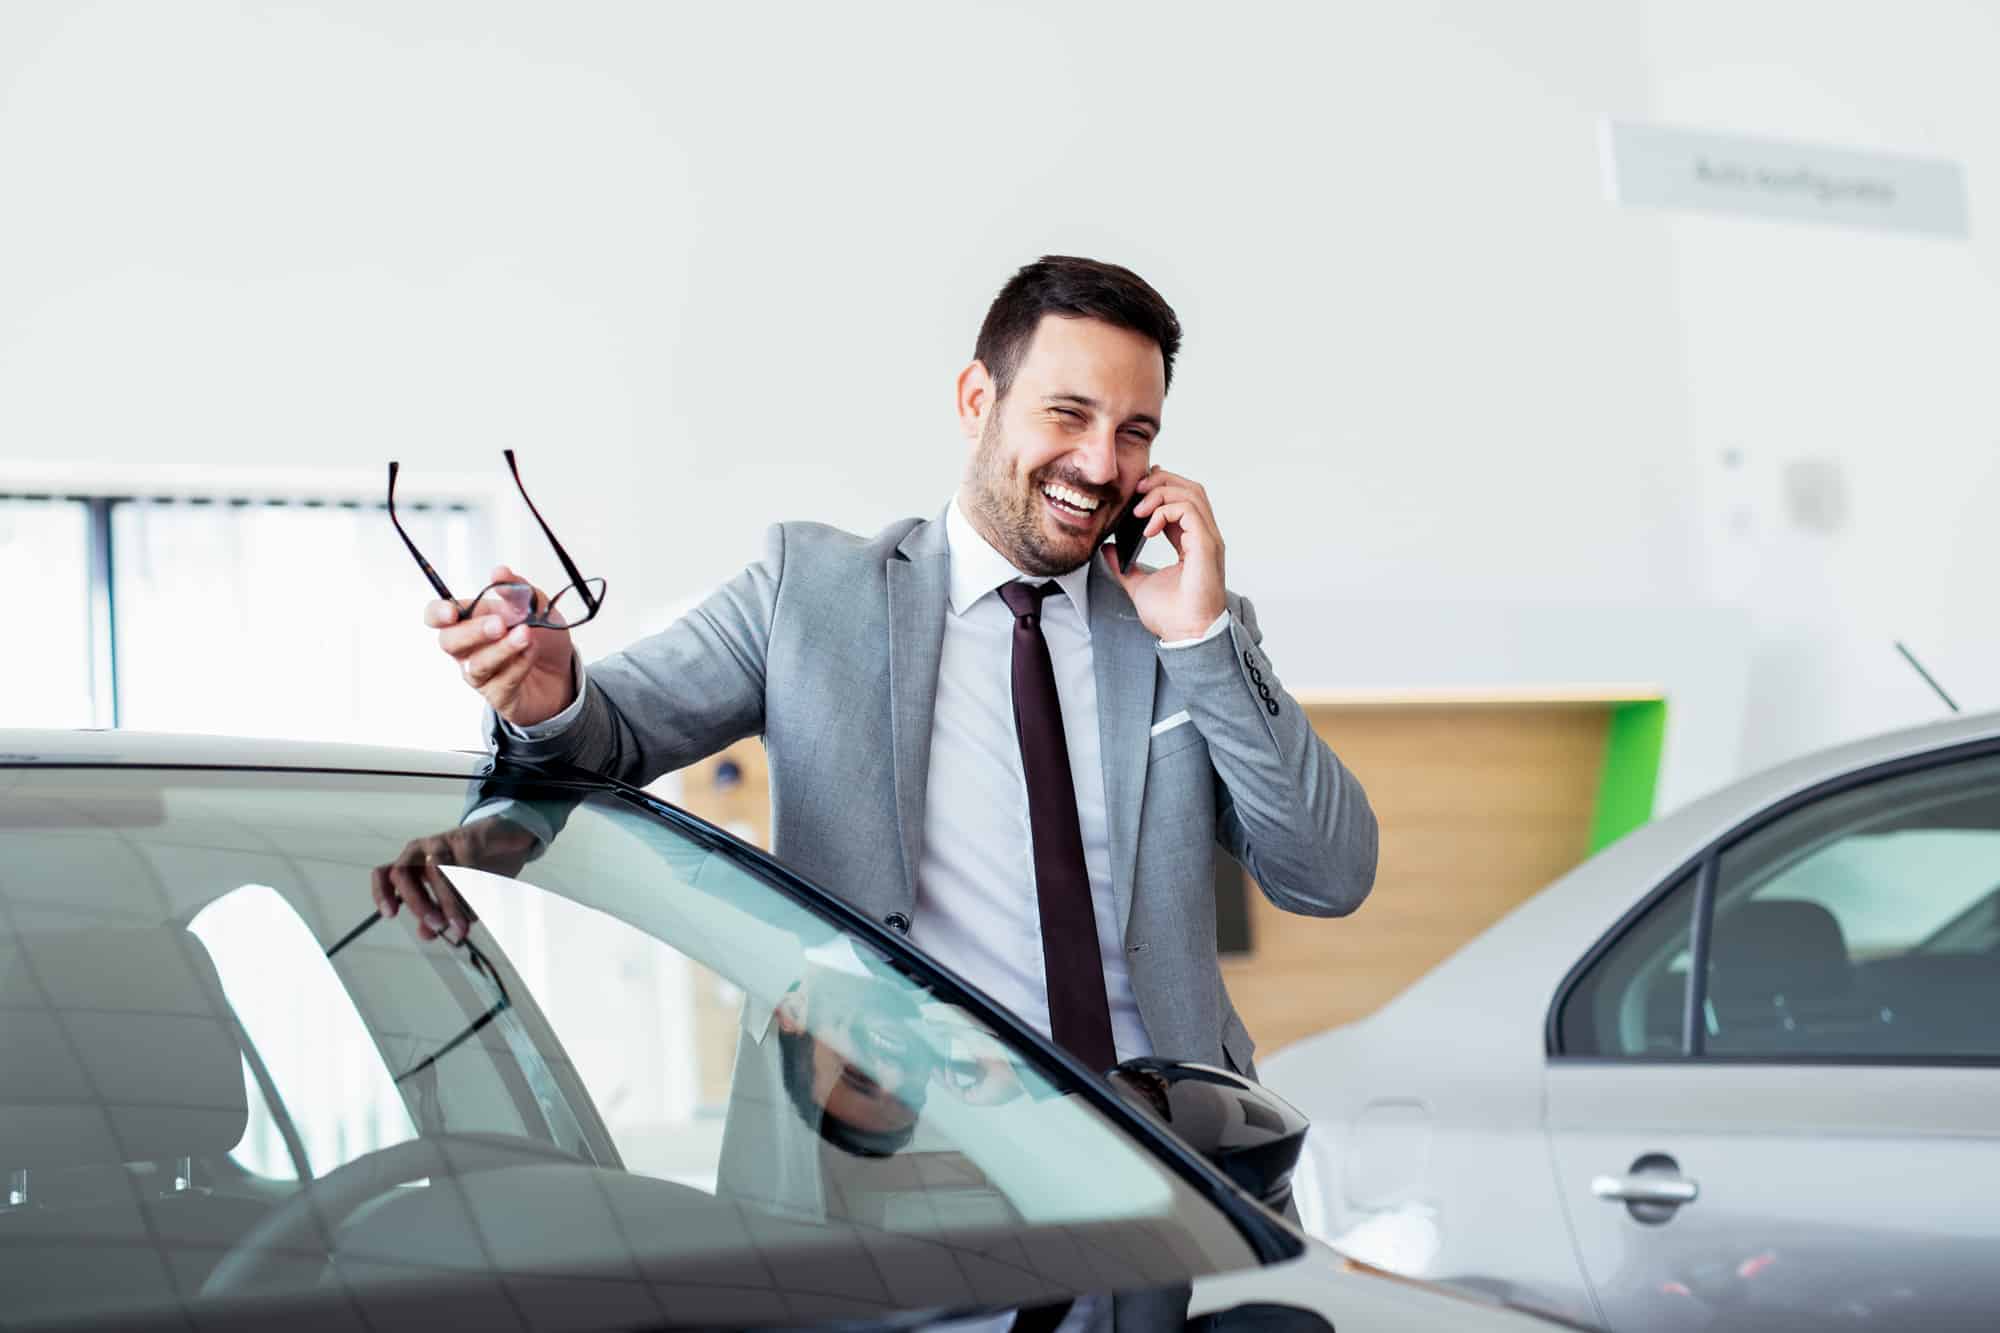 Person at dealership on phone laughing